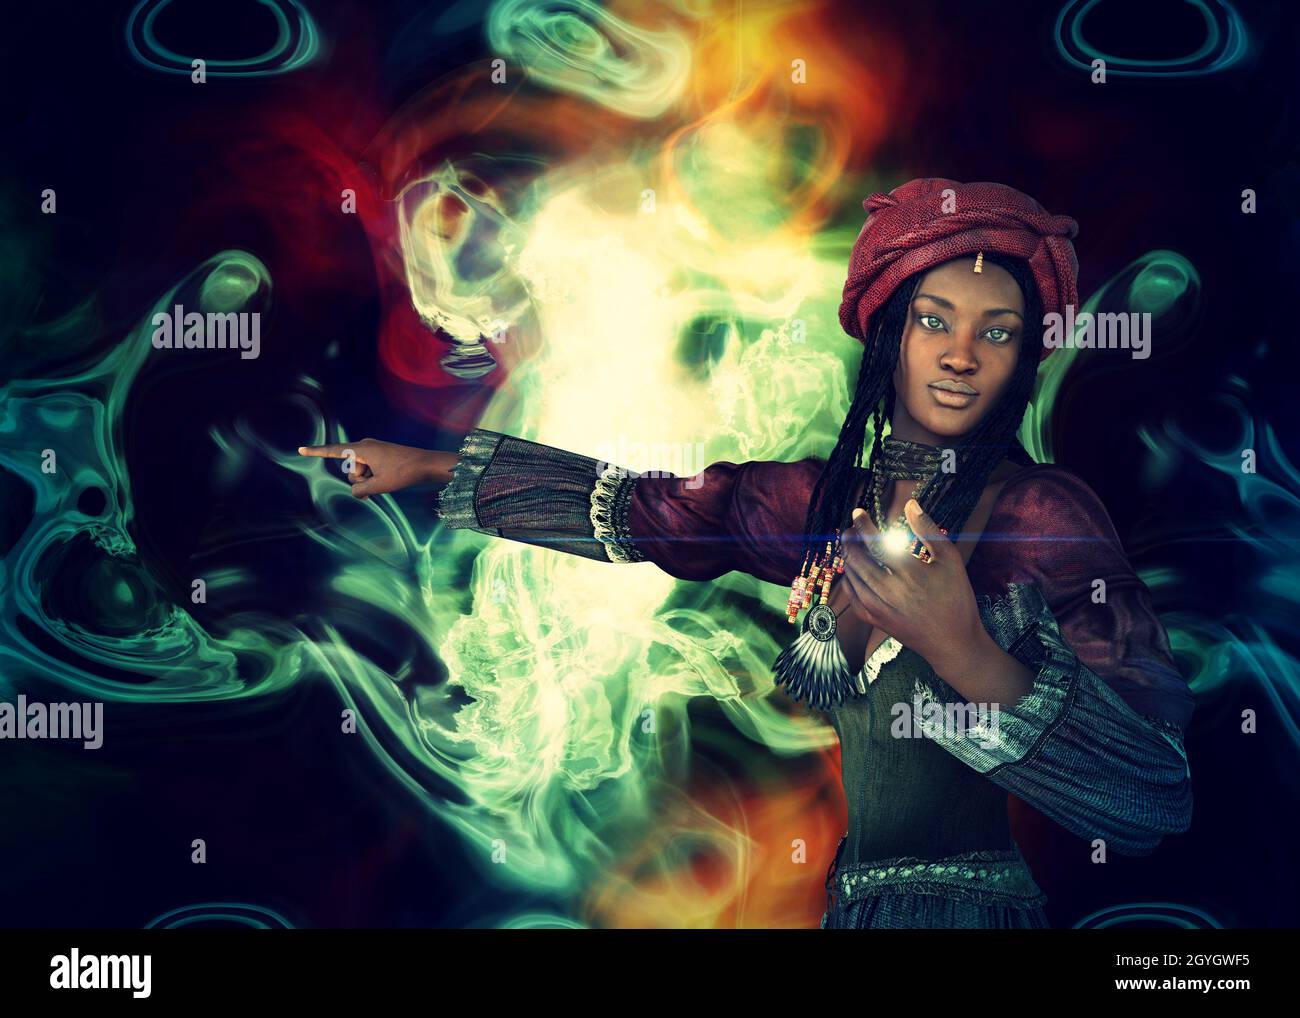 Voodoo shaman, african witch woman conjure, 3D illustration. Stock Photo